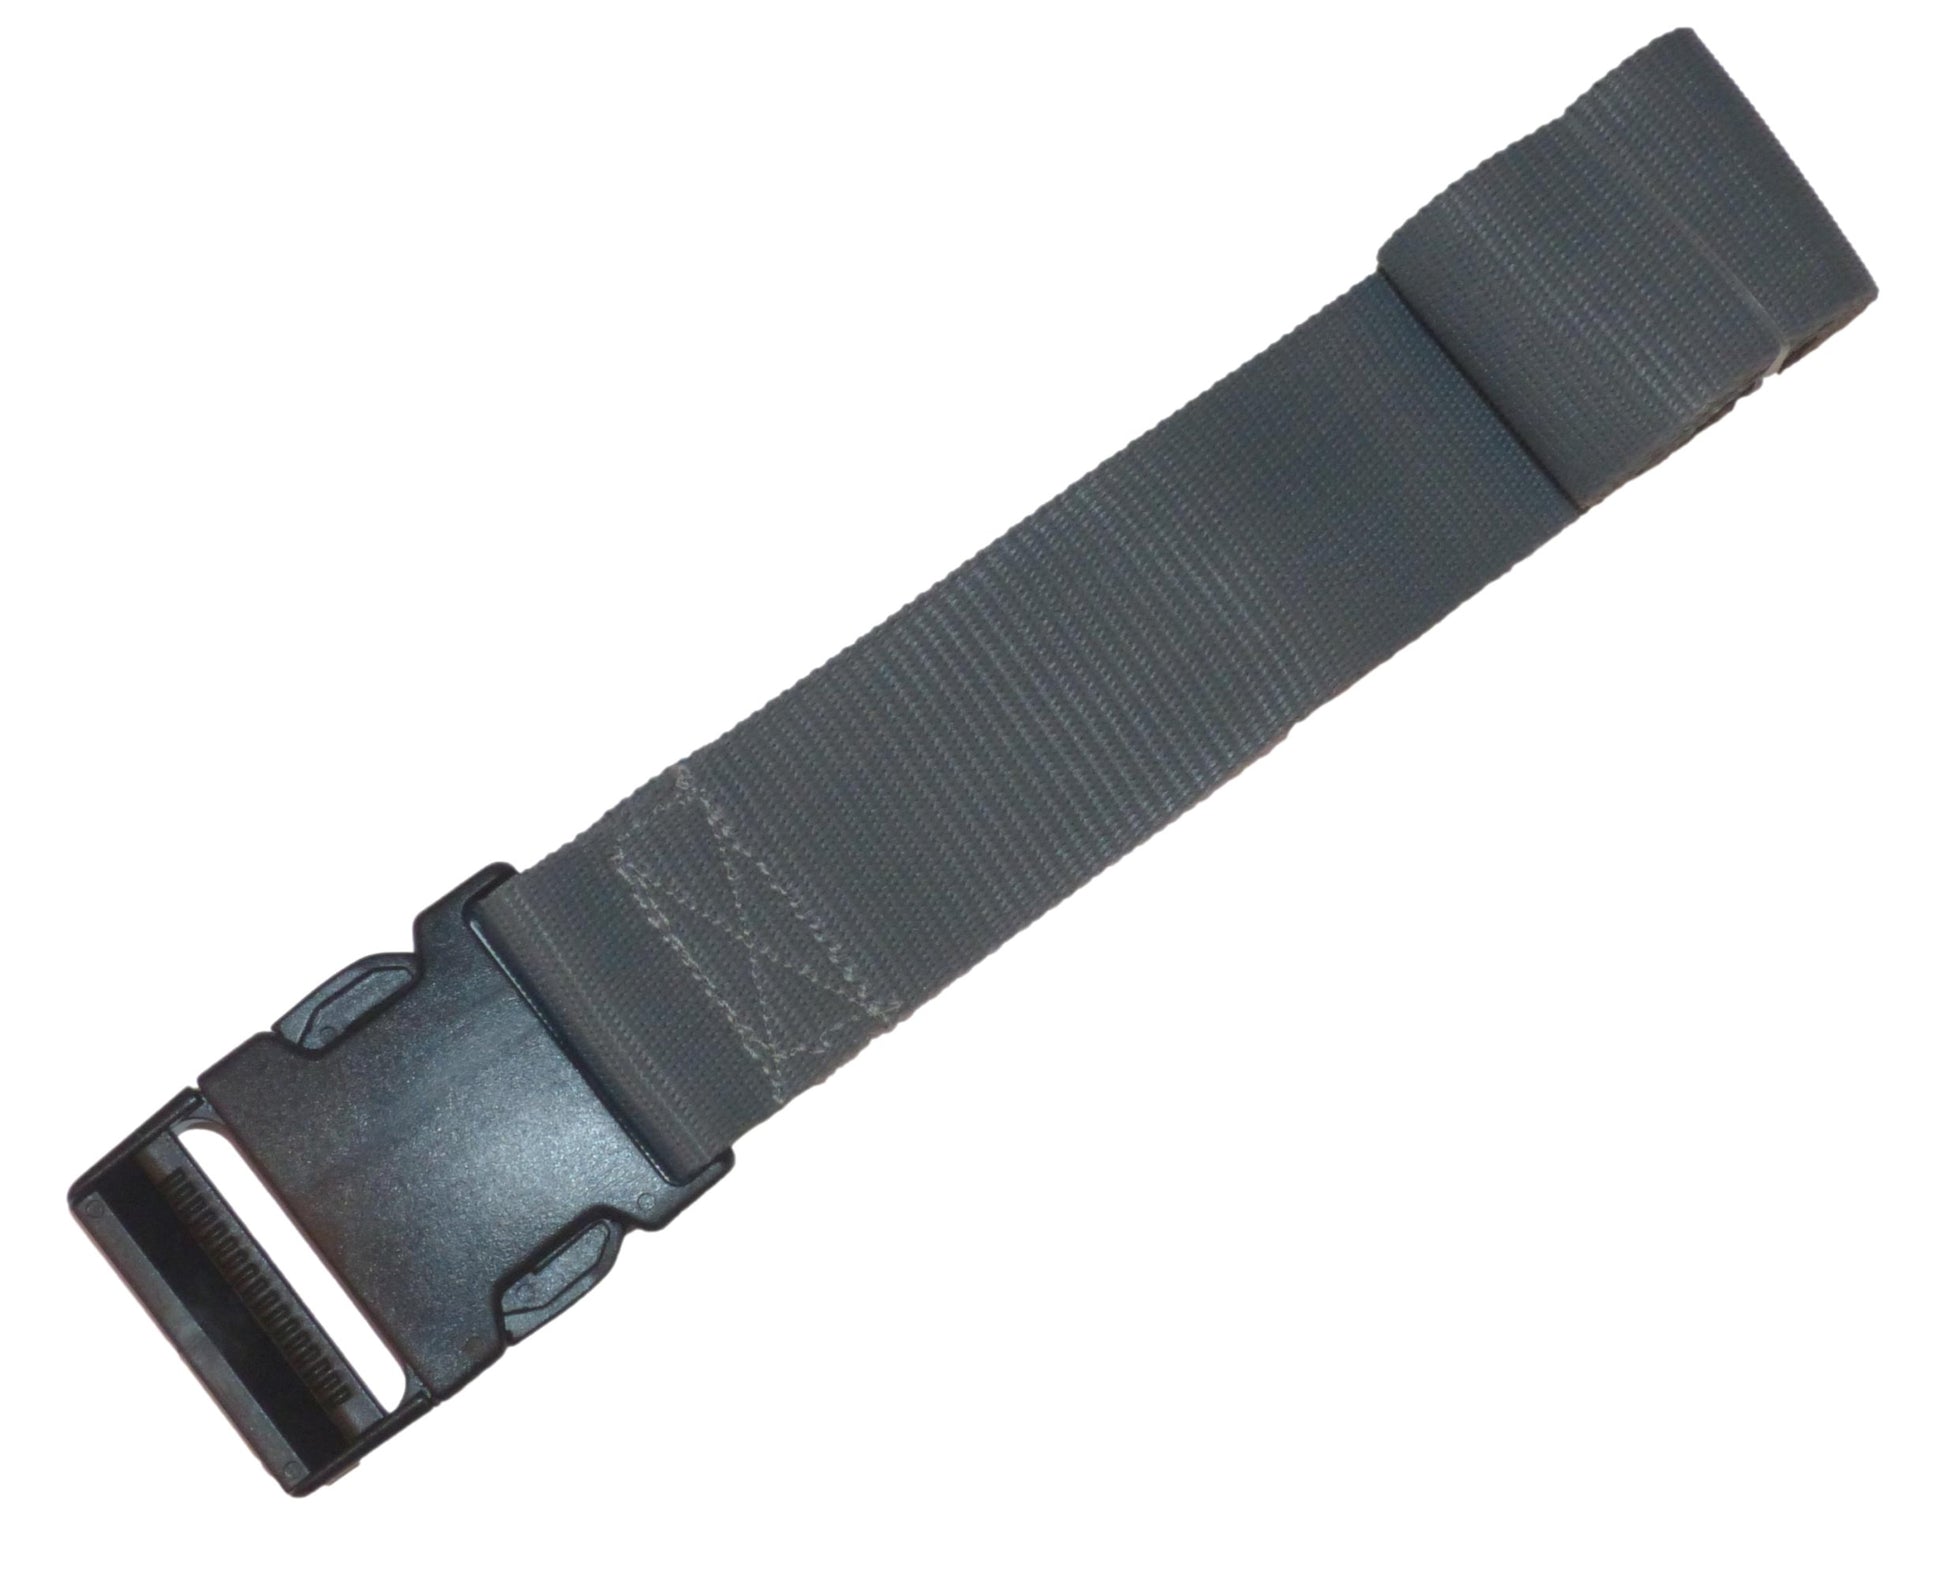 Benristraps 50mm Webbing Strap with Quick Release Buckle in grey